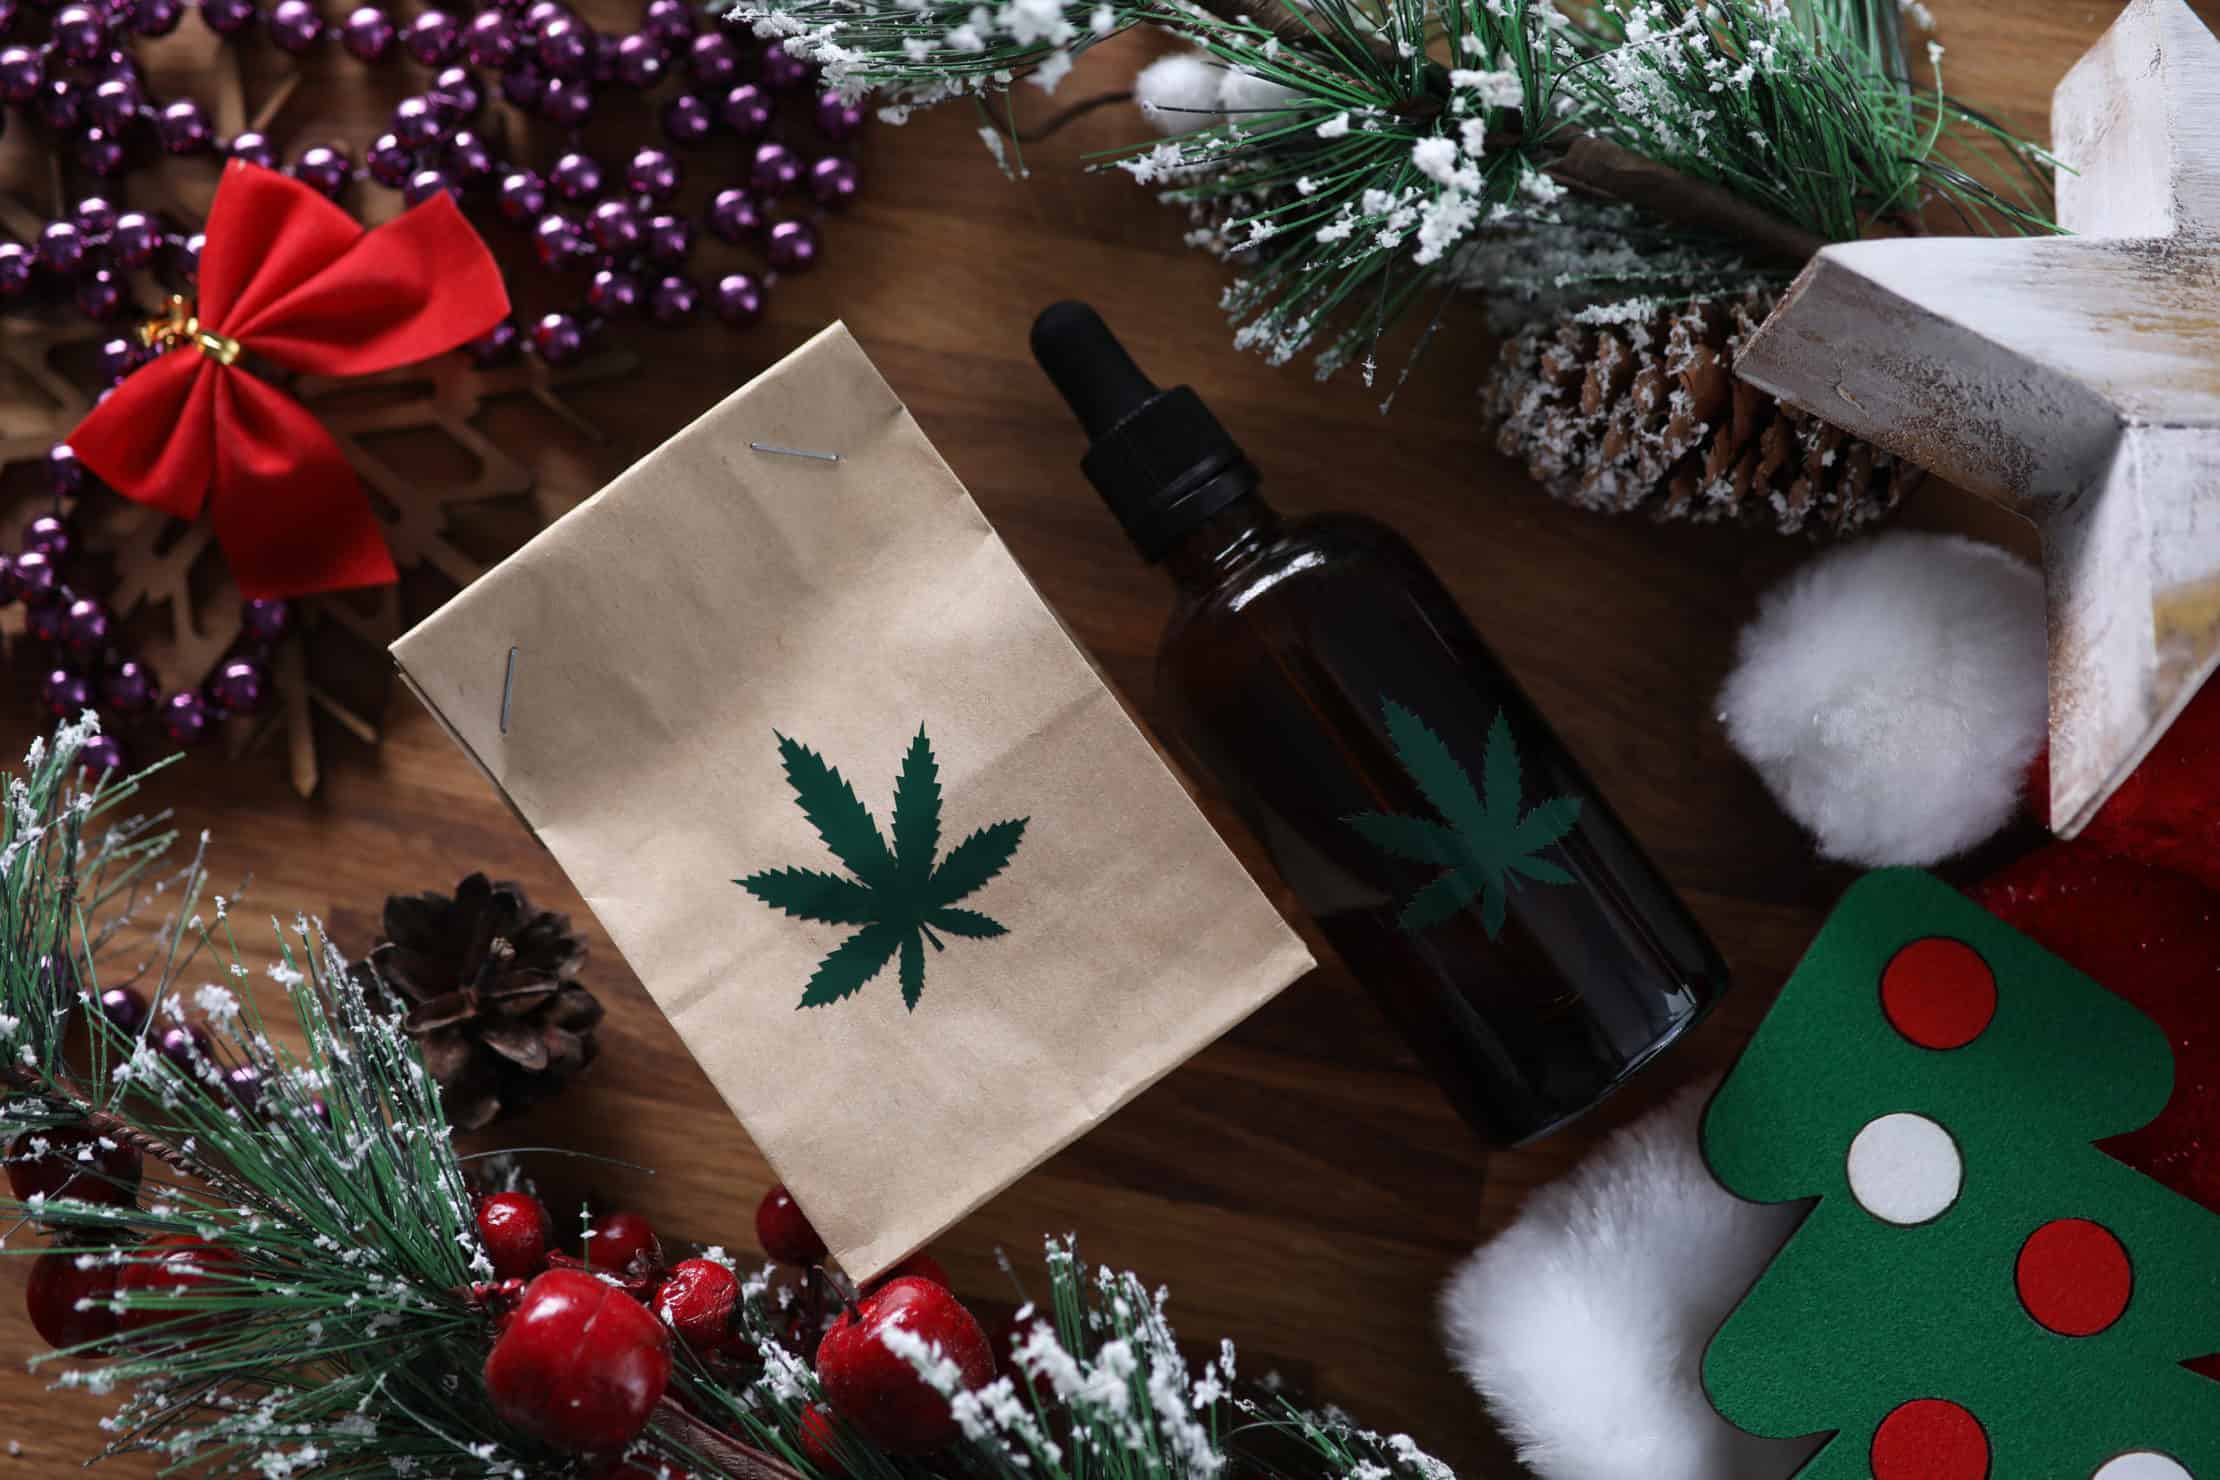 Best Cannabis Christmas Gifts 2019